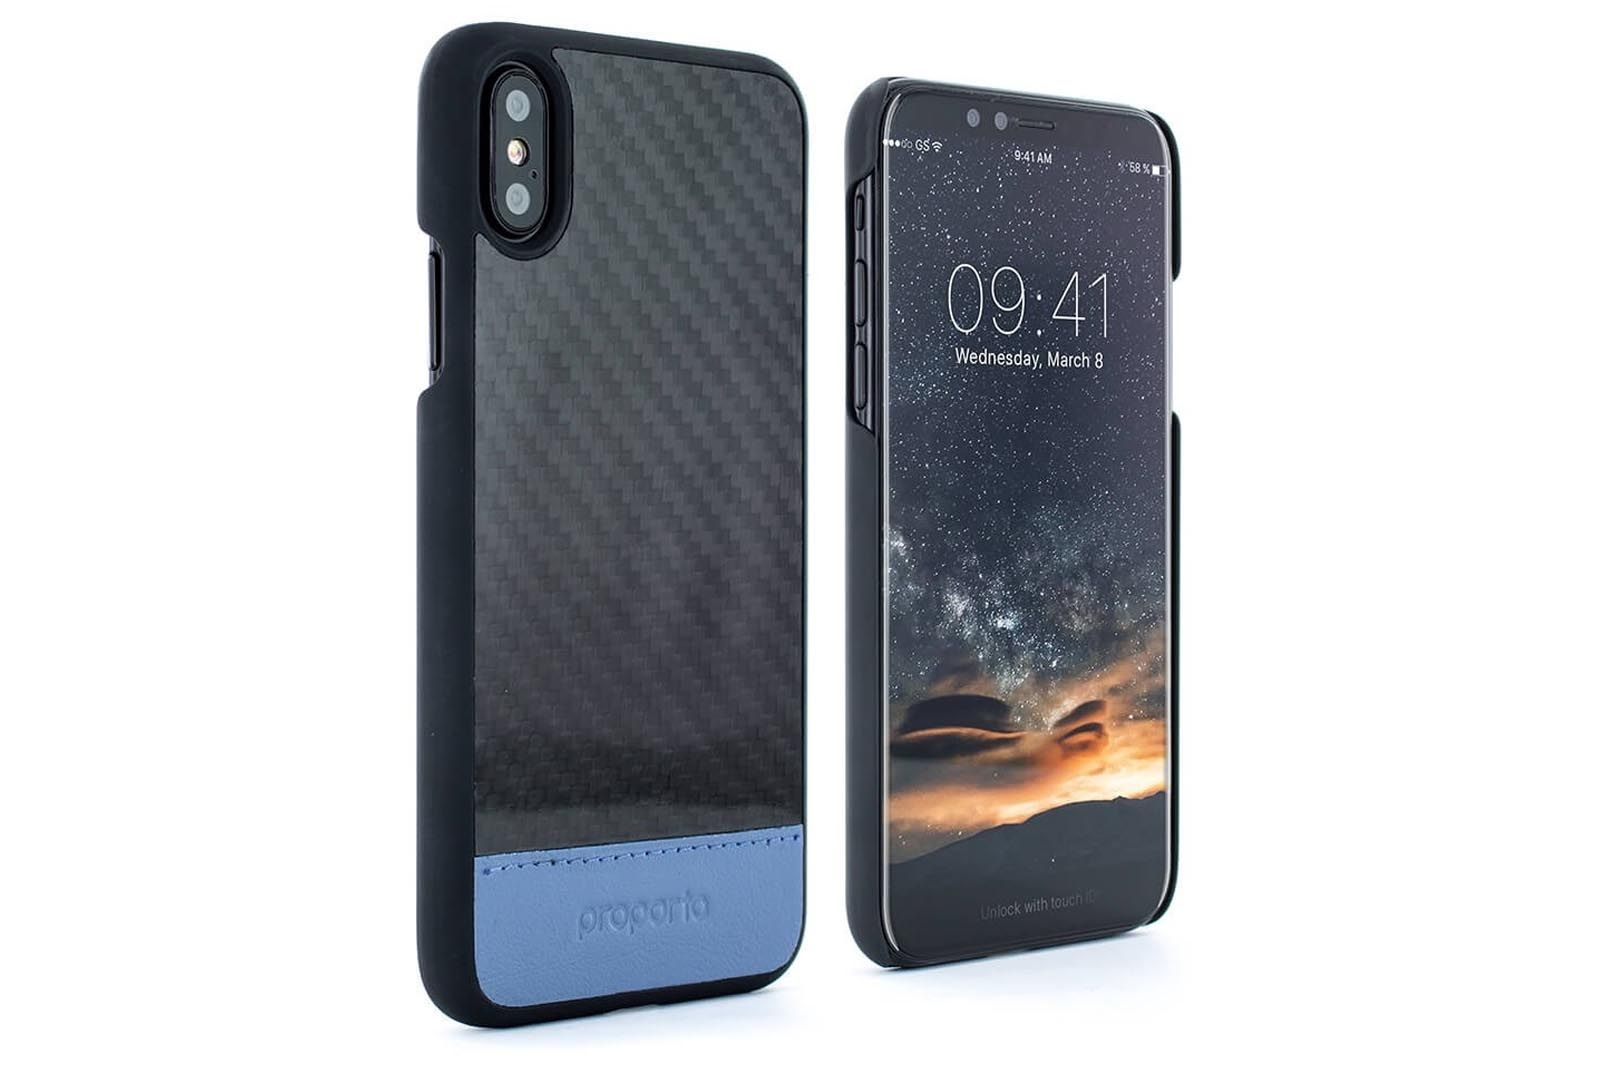 Best Iphone X Cases Protect Your New Apple Device image 12